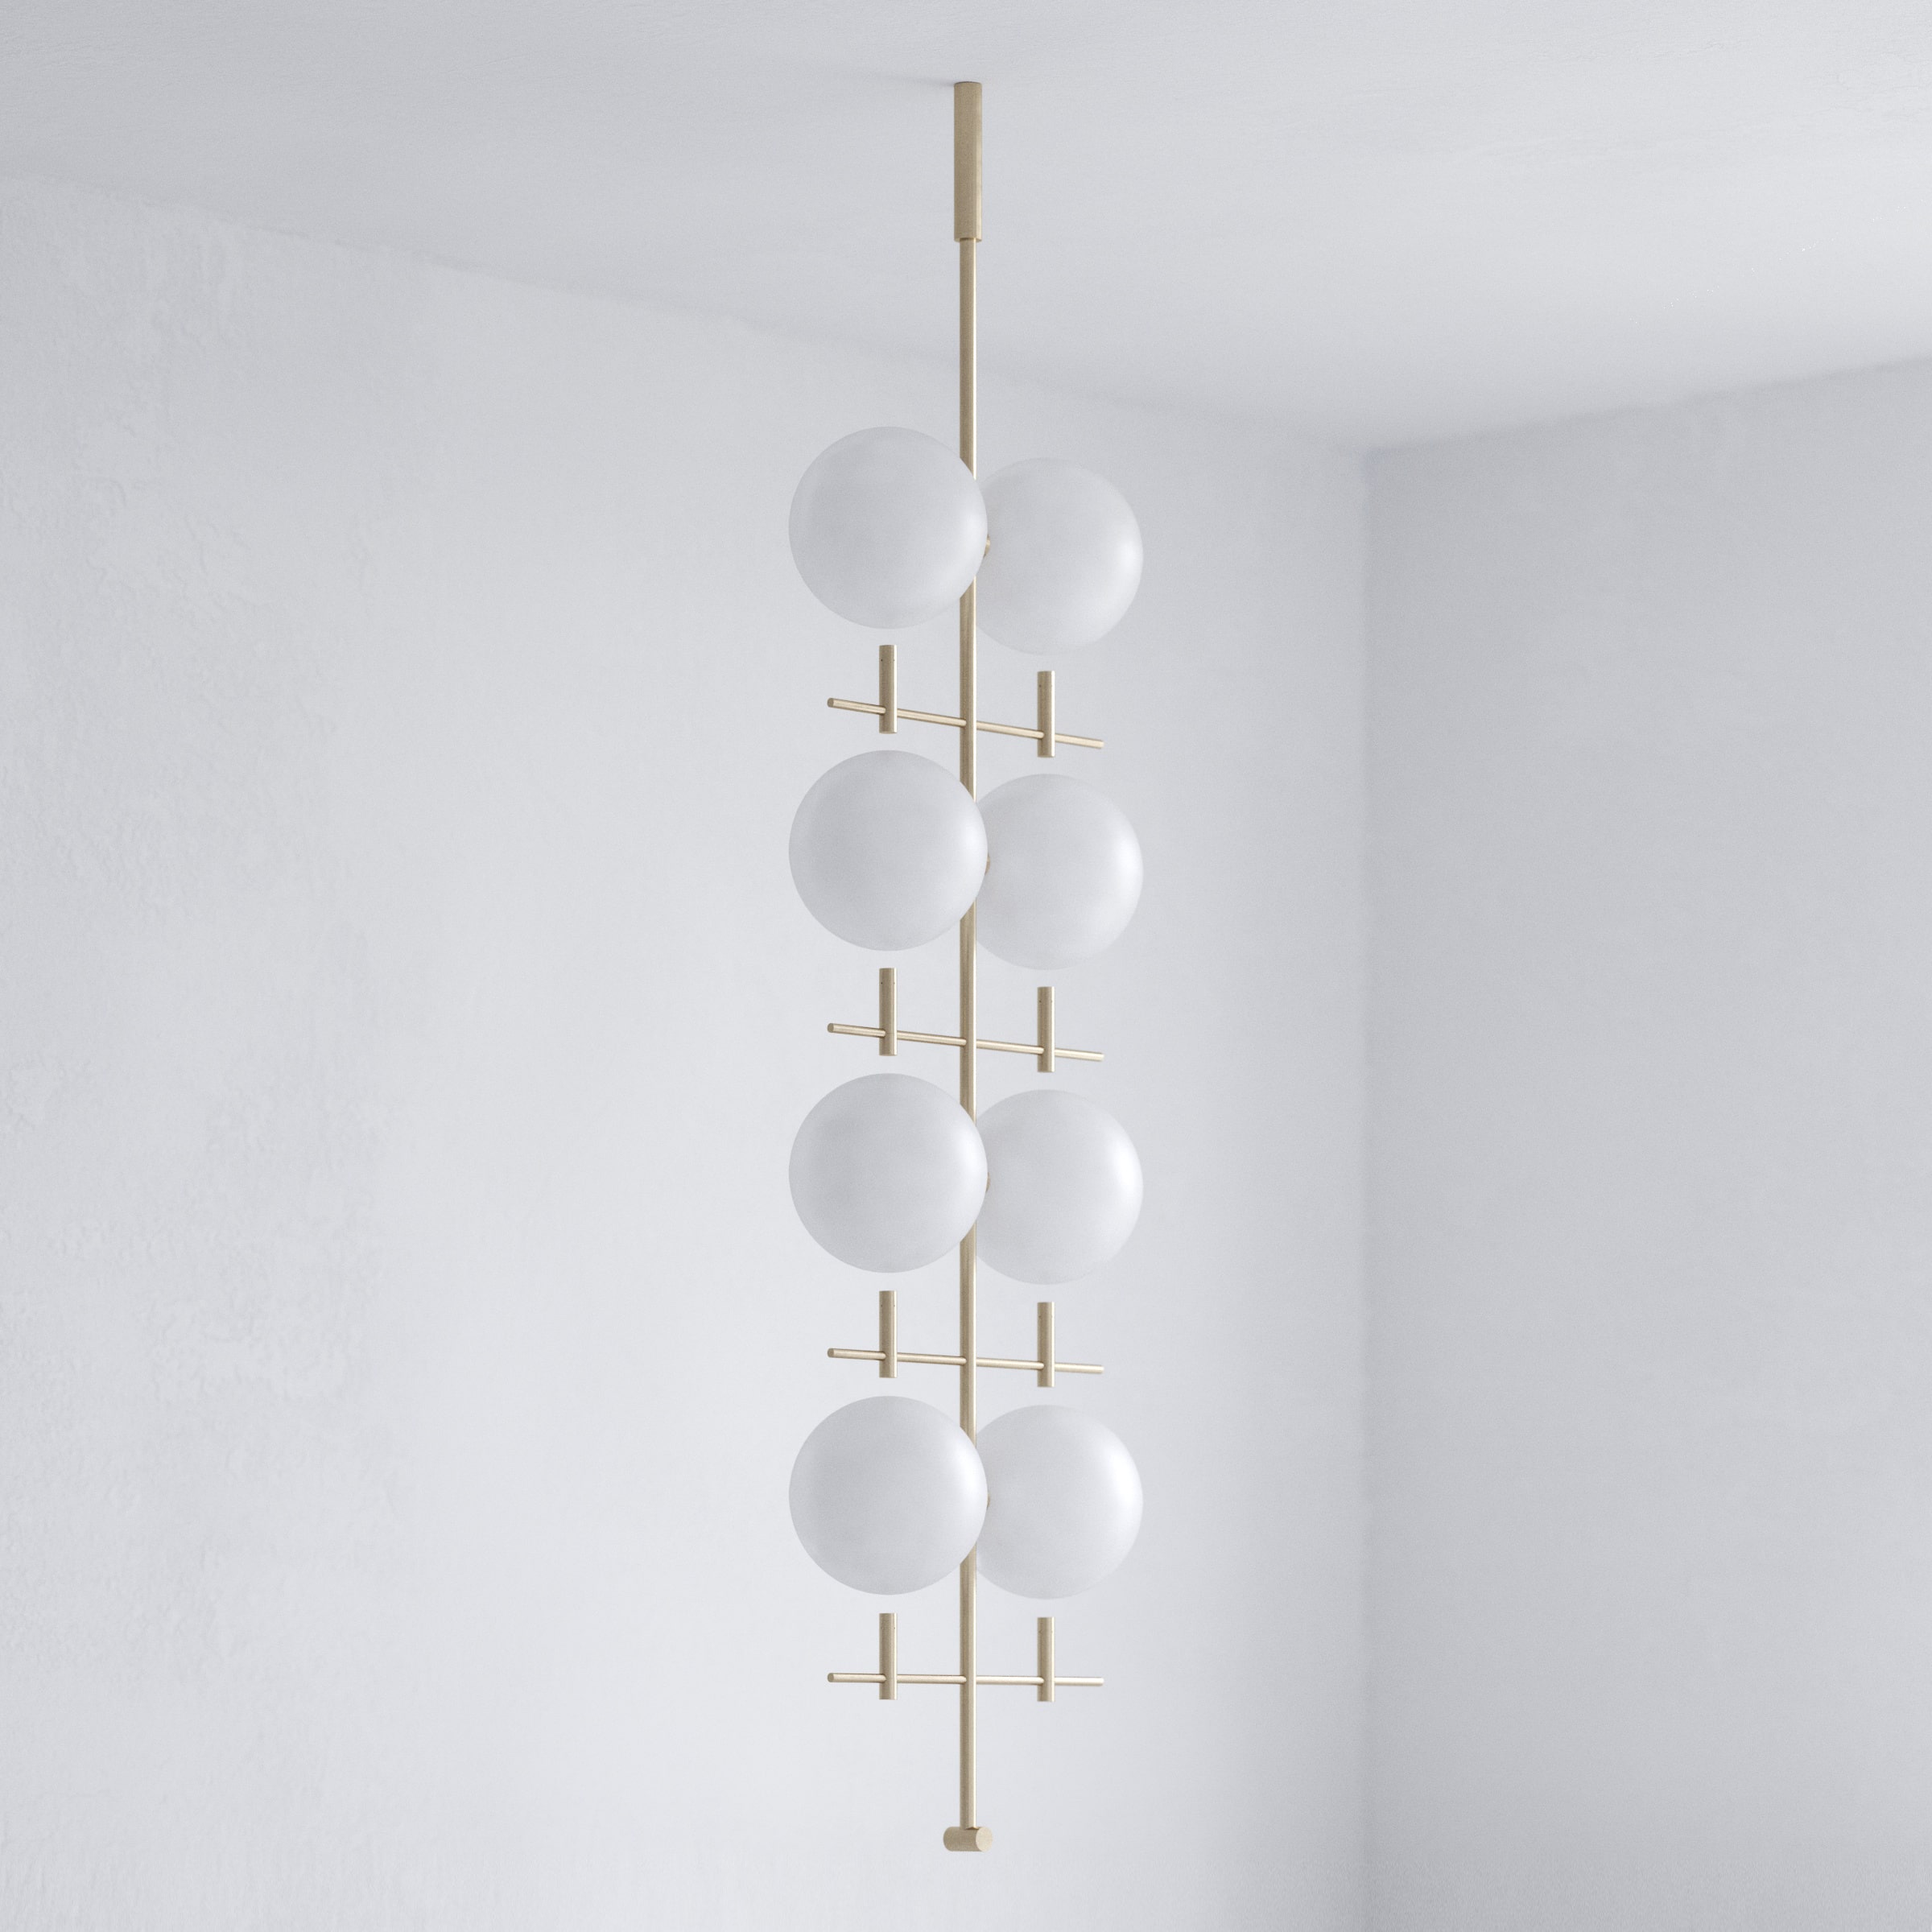 Handmade Luna Luminaries Collection of Lightning made of Glass and Brass in Golden Eight Lamps